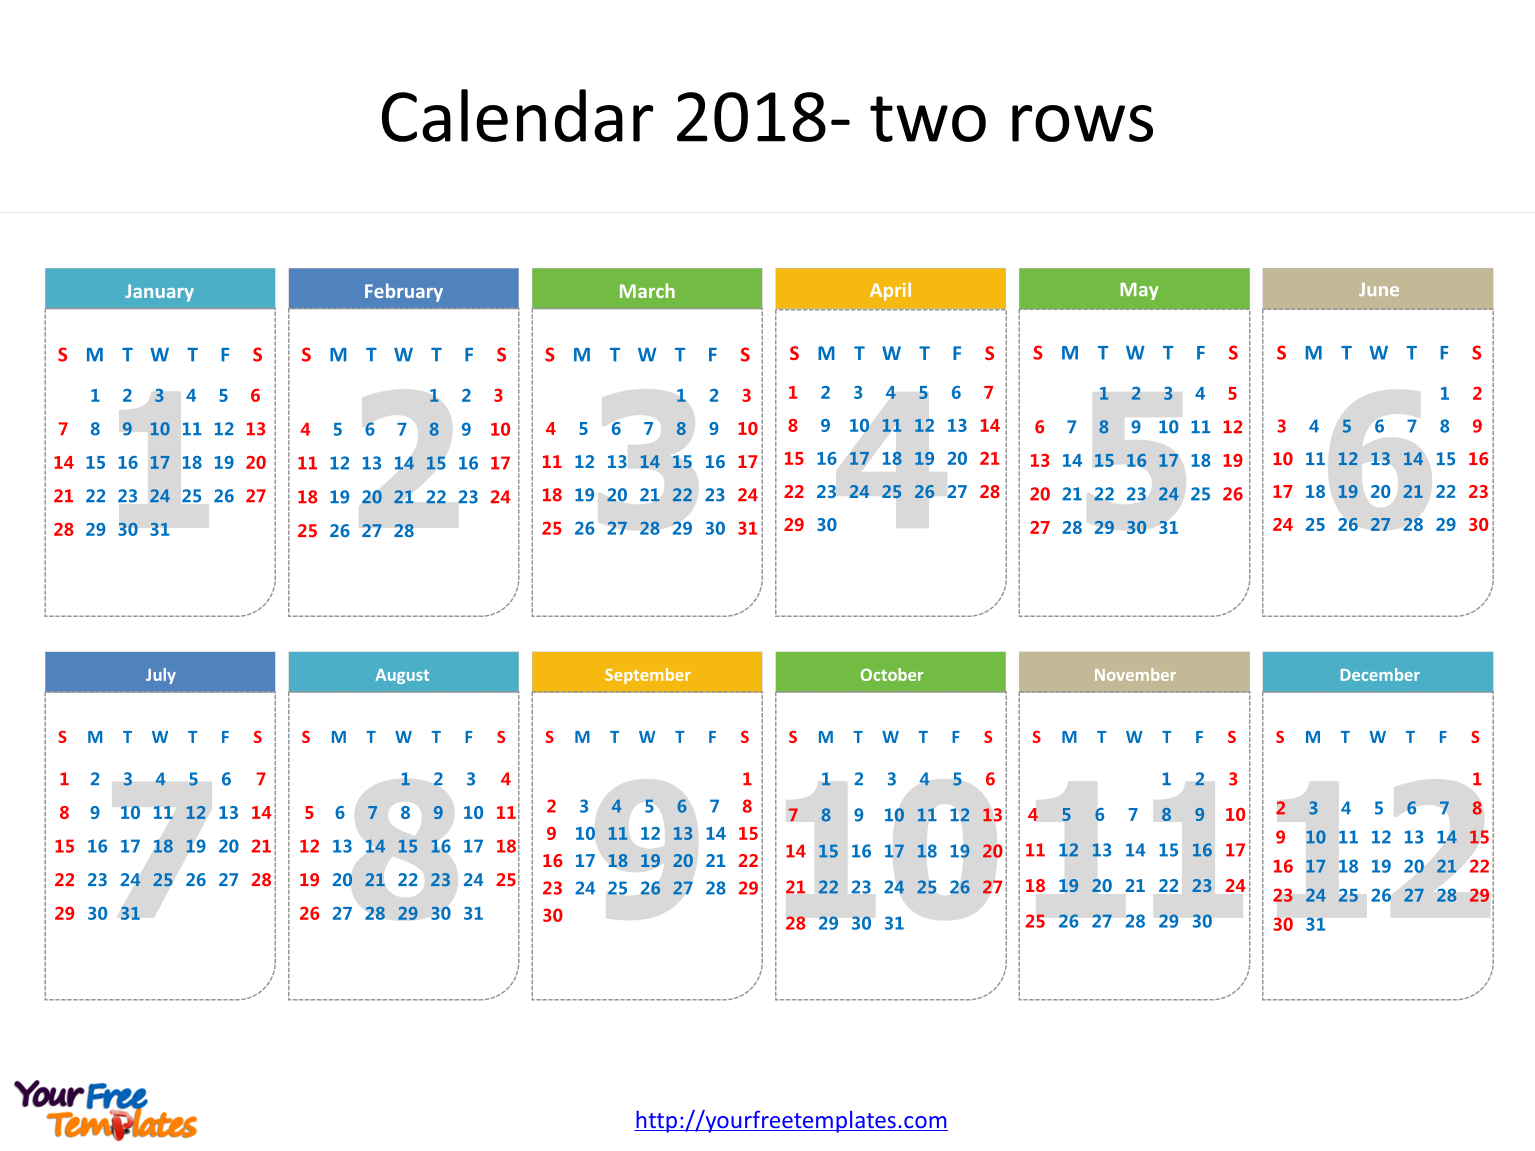 2018 Calendar template with every date in it